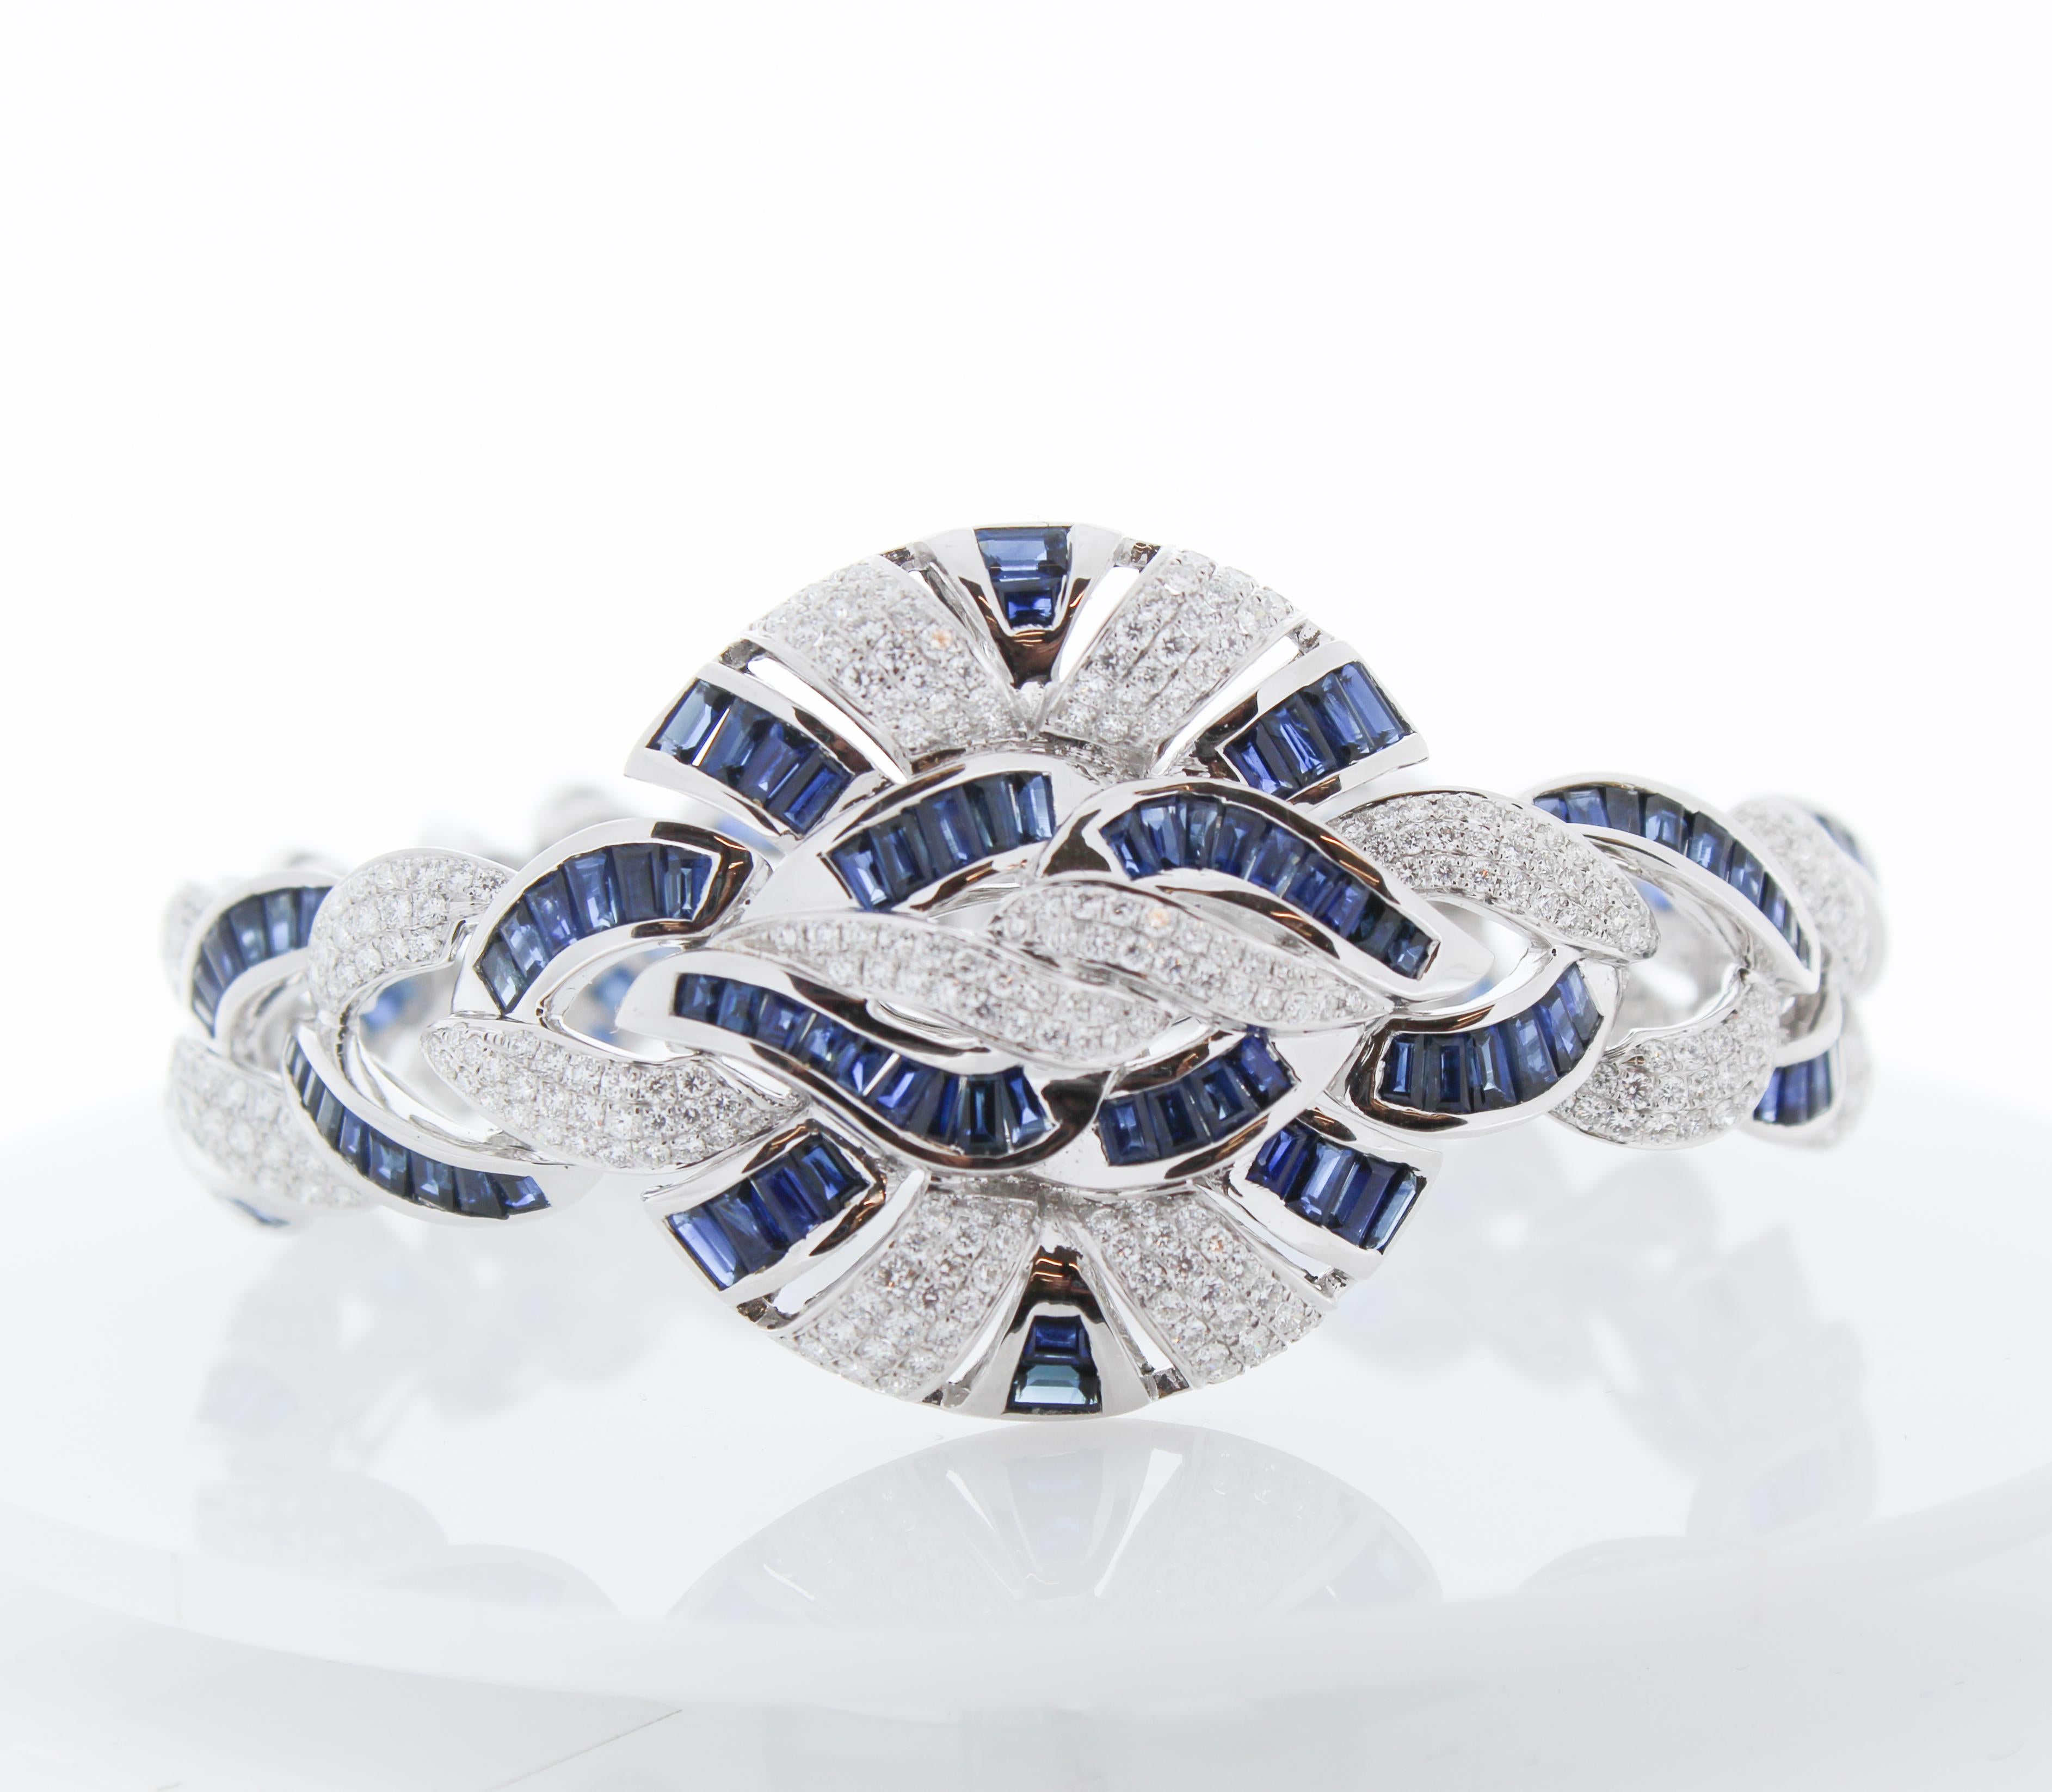 This decorative Art Deco style bracelet has 17 oval cut tanzanites totaling 21.67 carats. The gem source is near the foothills of Mt. Kilimanjaro in Tanzania; the suite is perfectly matched in size, vivid blue-violet, transparency, and luster. These